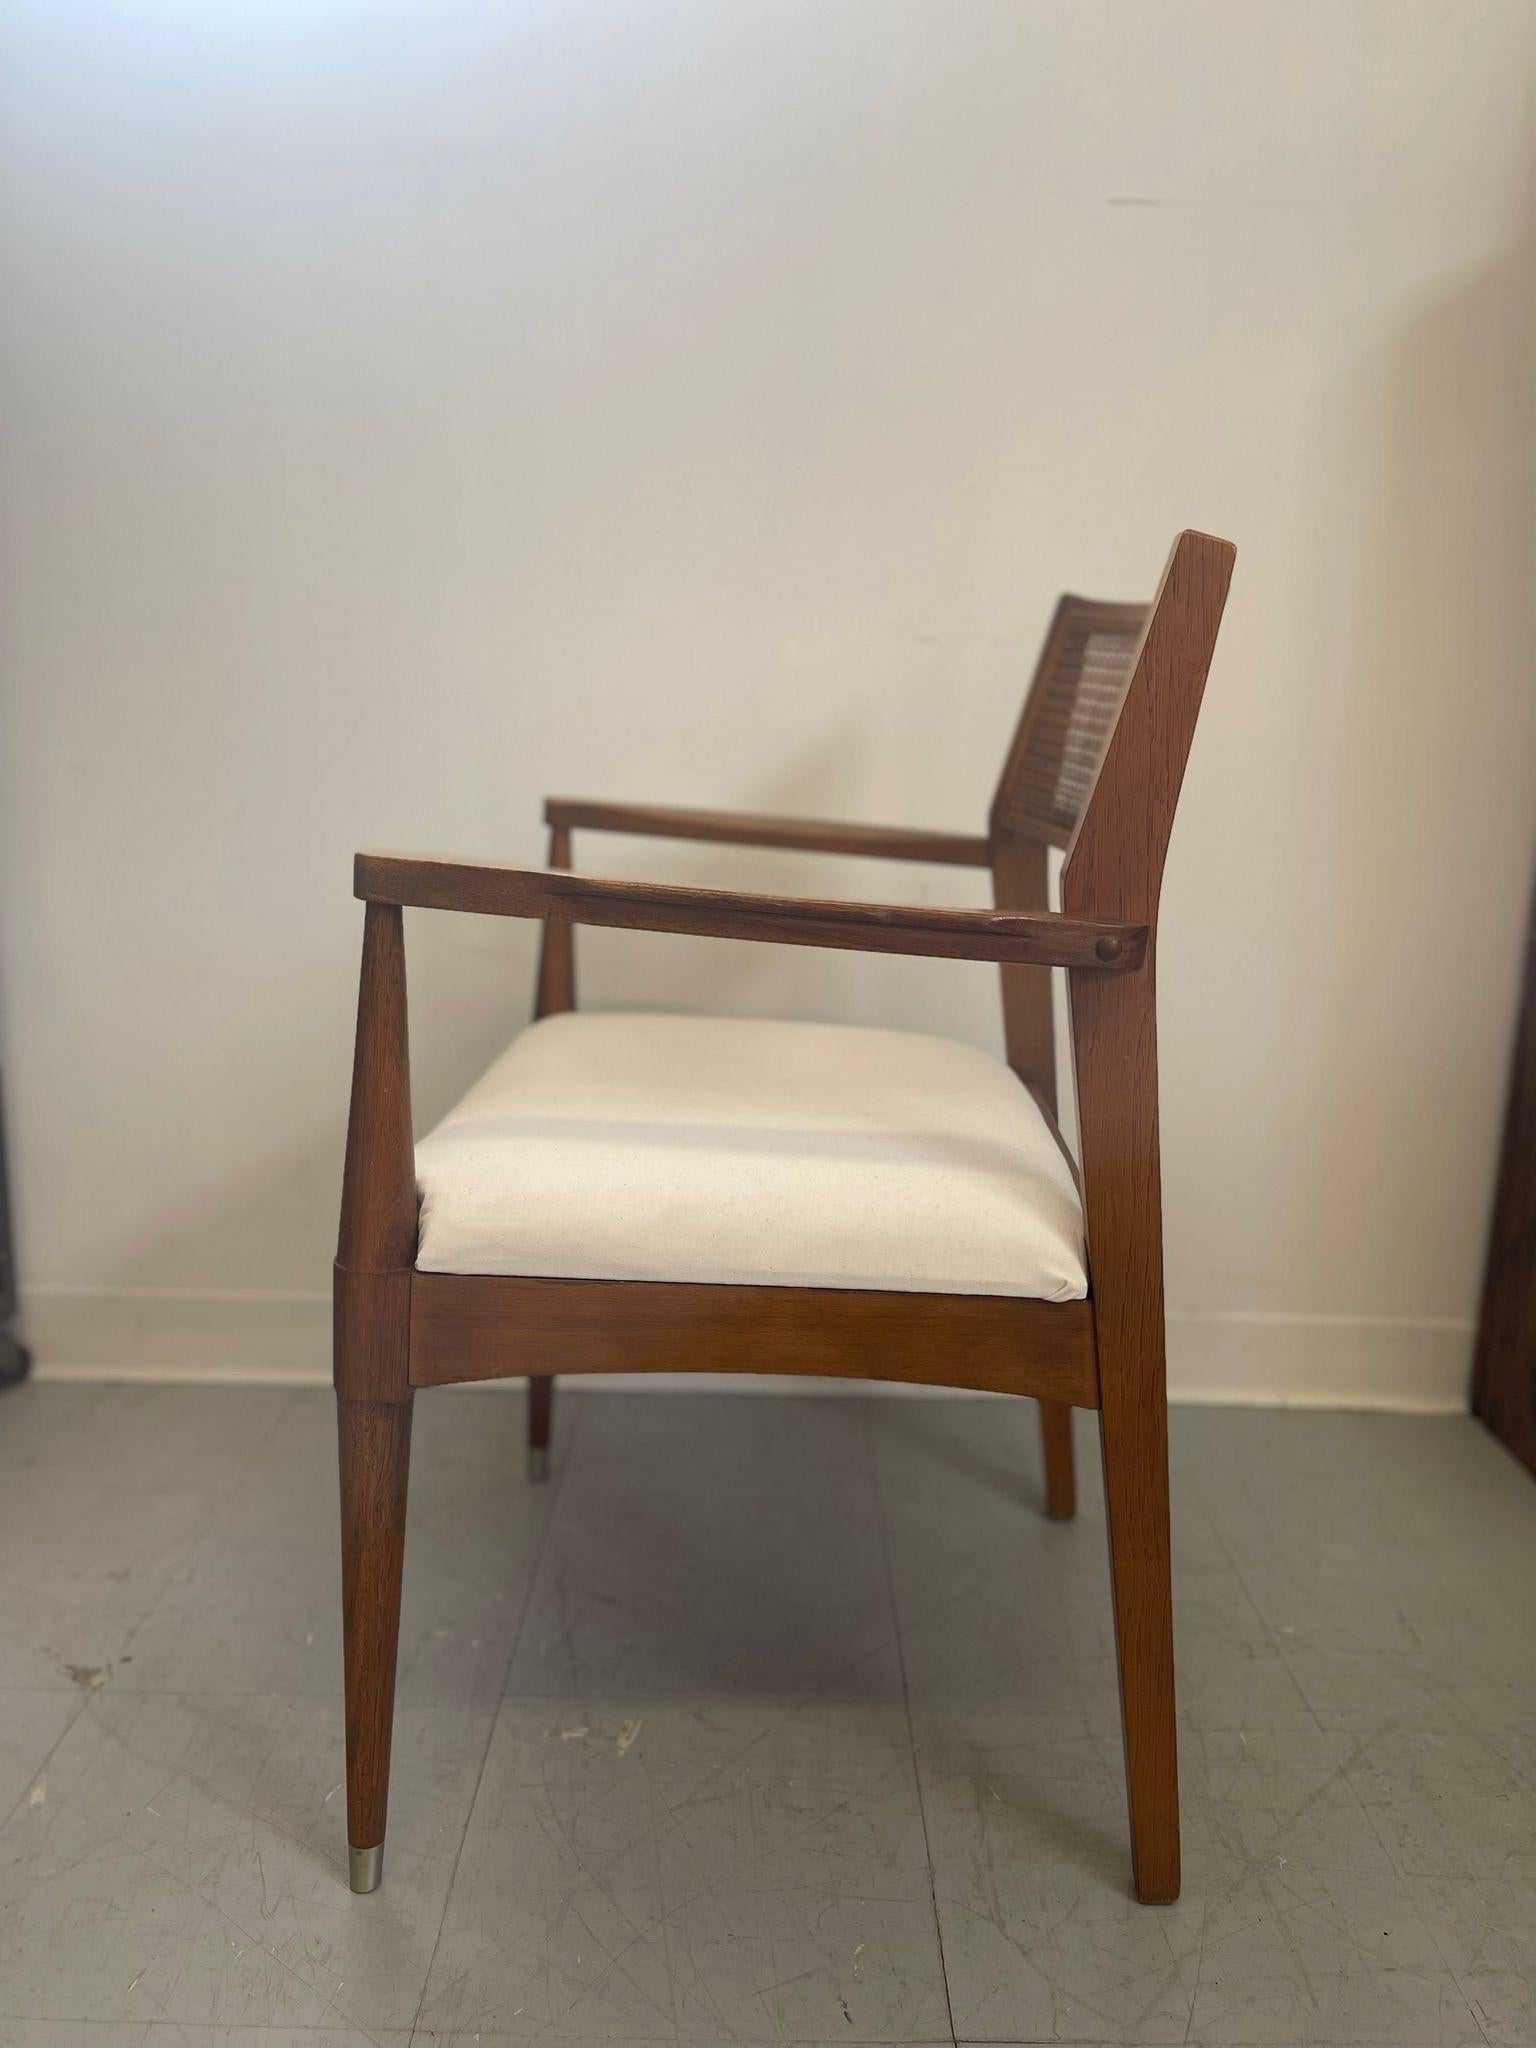 Mid-Century Modern Vintage Mid Century Modern Chair With Rattan Backing For Sale